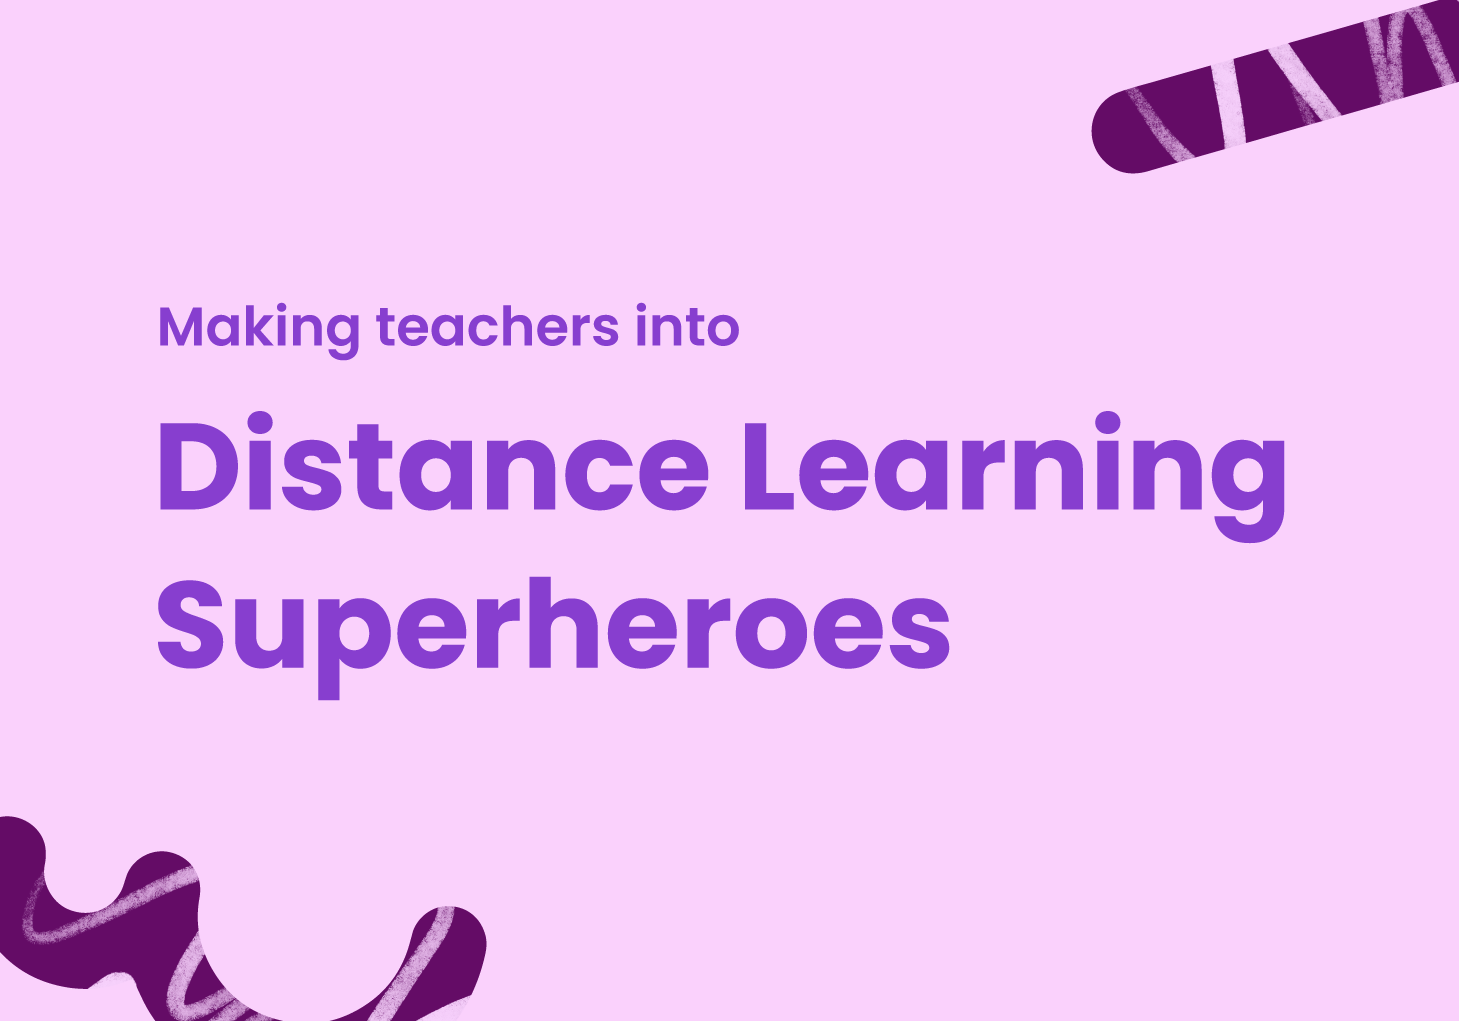 Making teachers into Distance Learning Superheroes